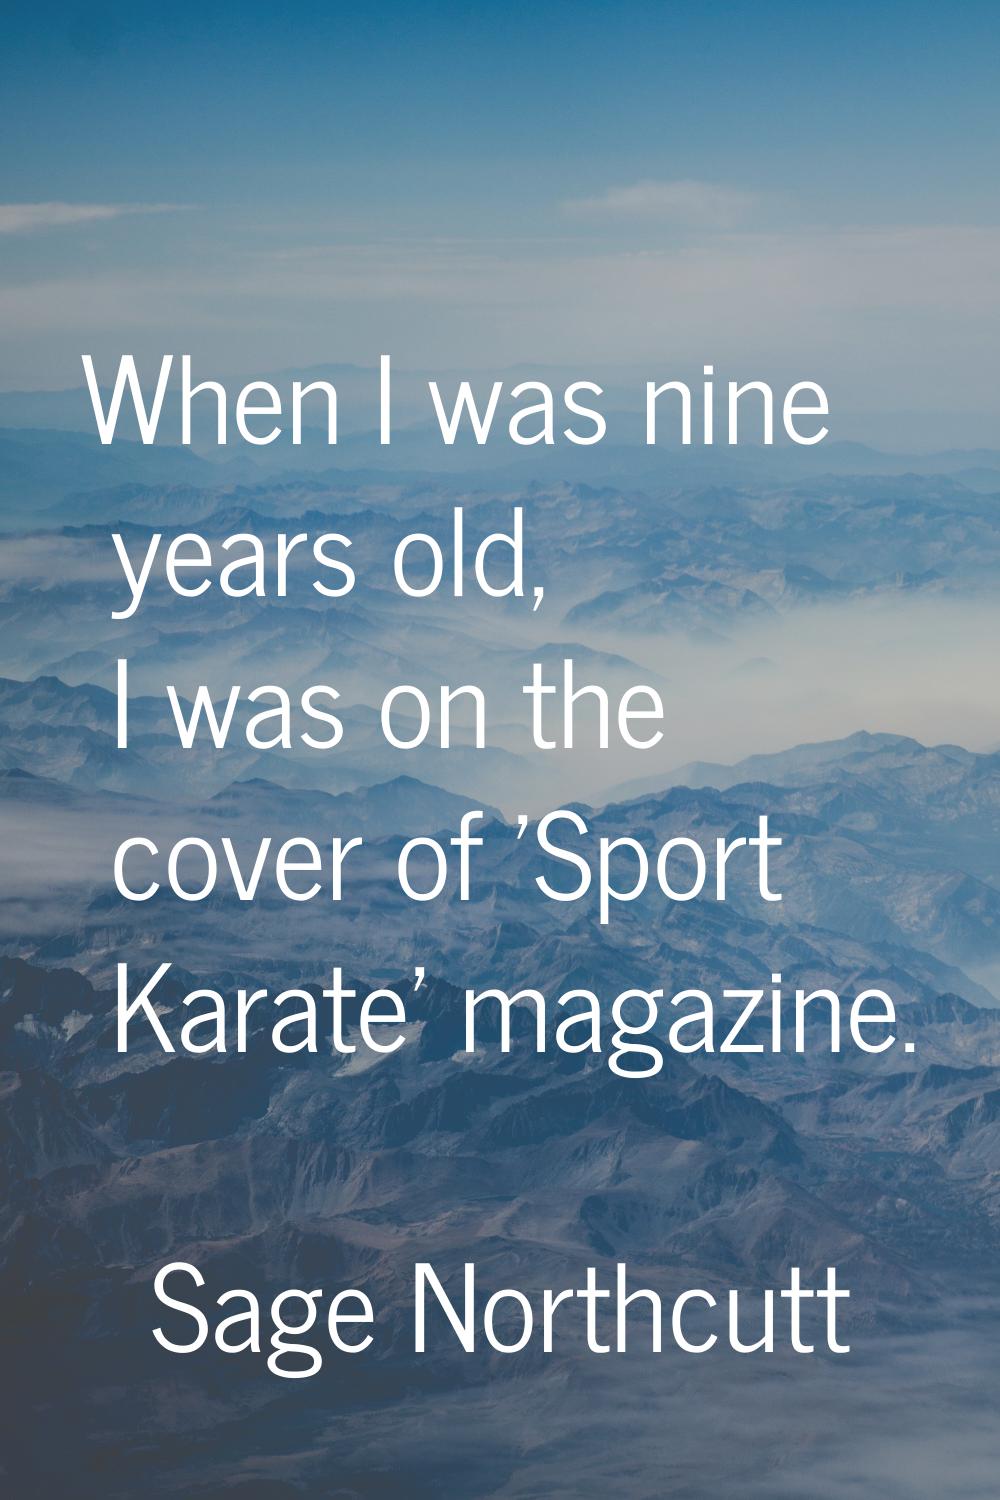 When I was nine years old, I was on the cover of 'Sport Karate' magazine.